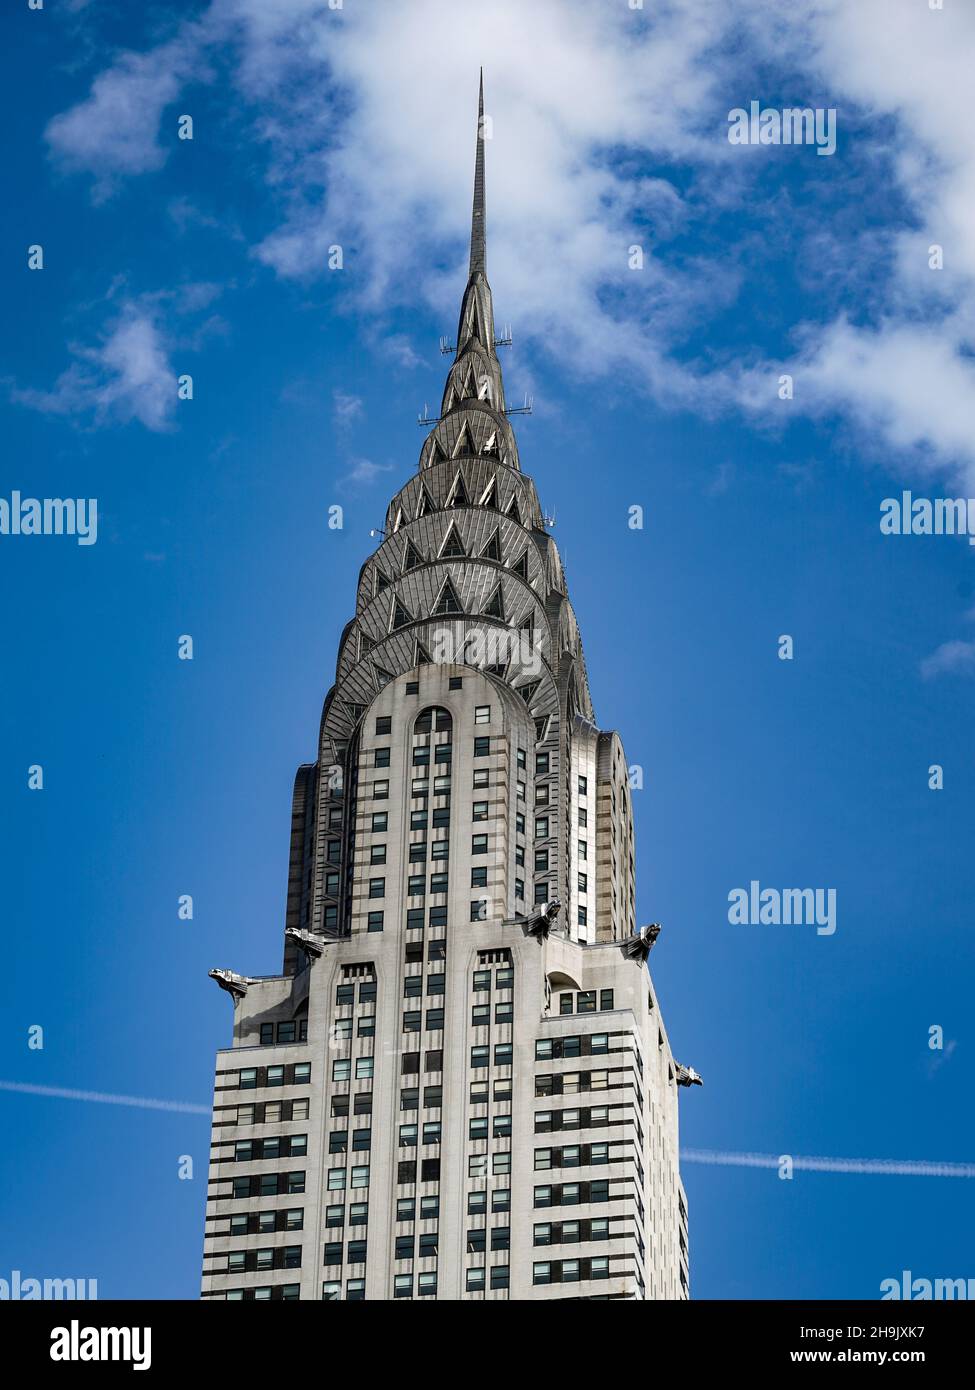 The top of the Chrysler Building in New York City in the United States. From a series of travel photos in the United States. Photo date: Friday, April 6, 2018. Photo credit should read: Richard Gray/EMPICS Stock Photo